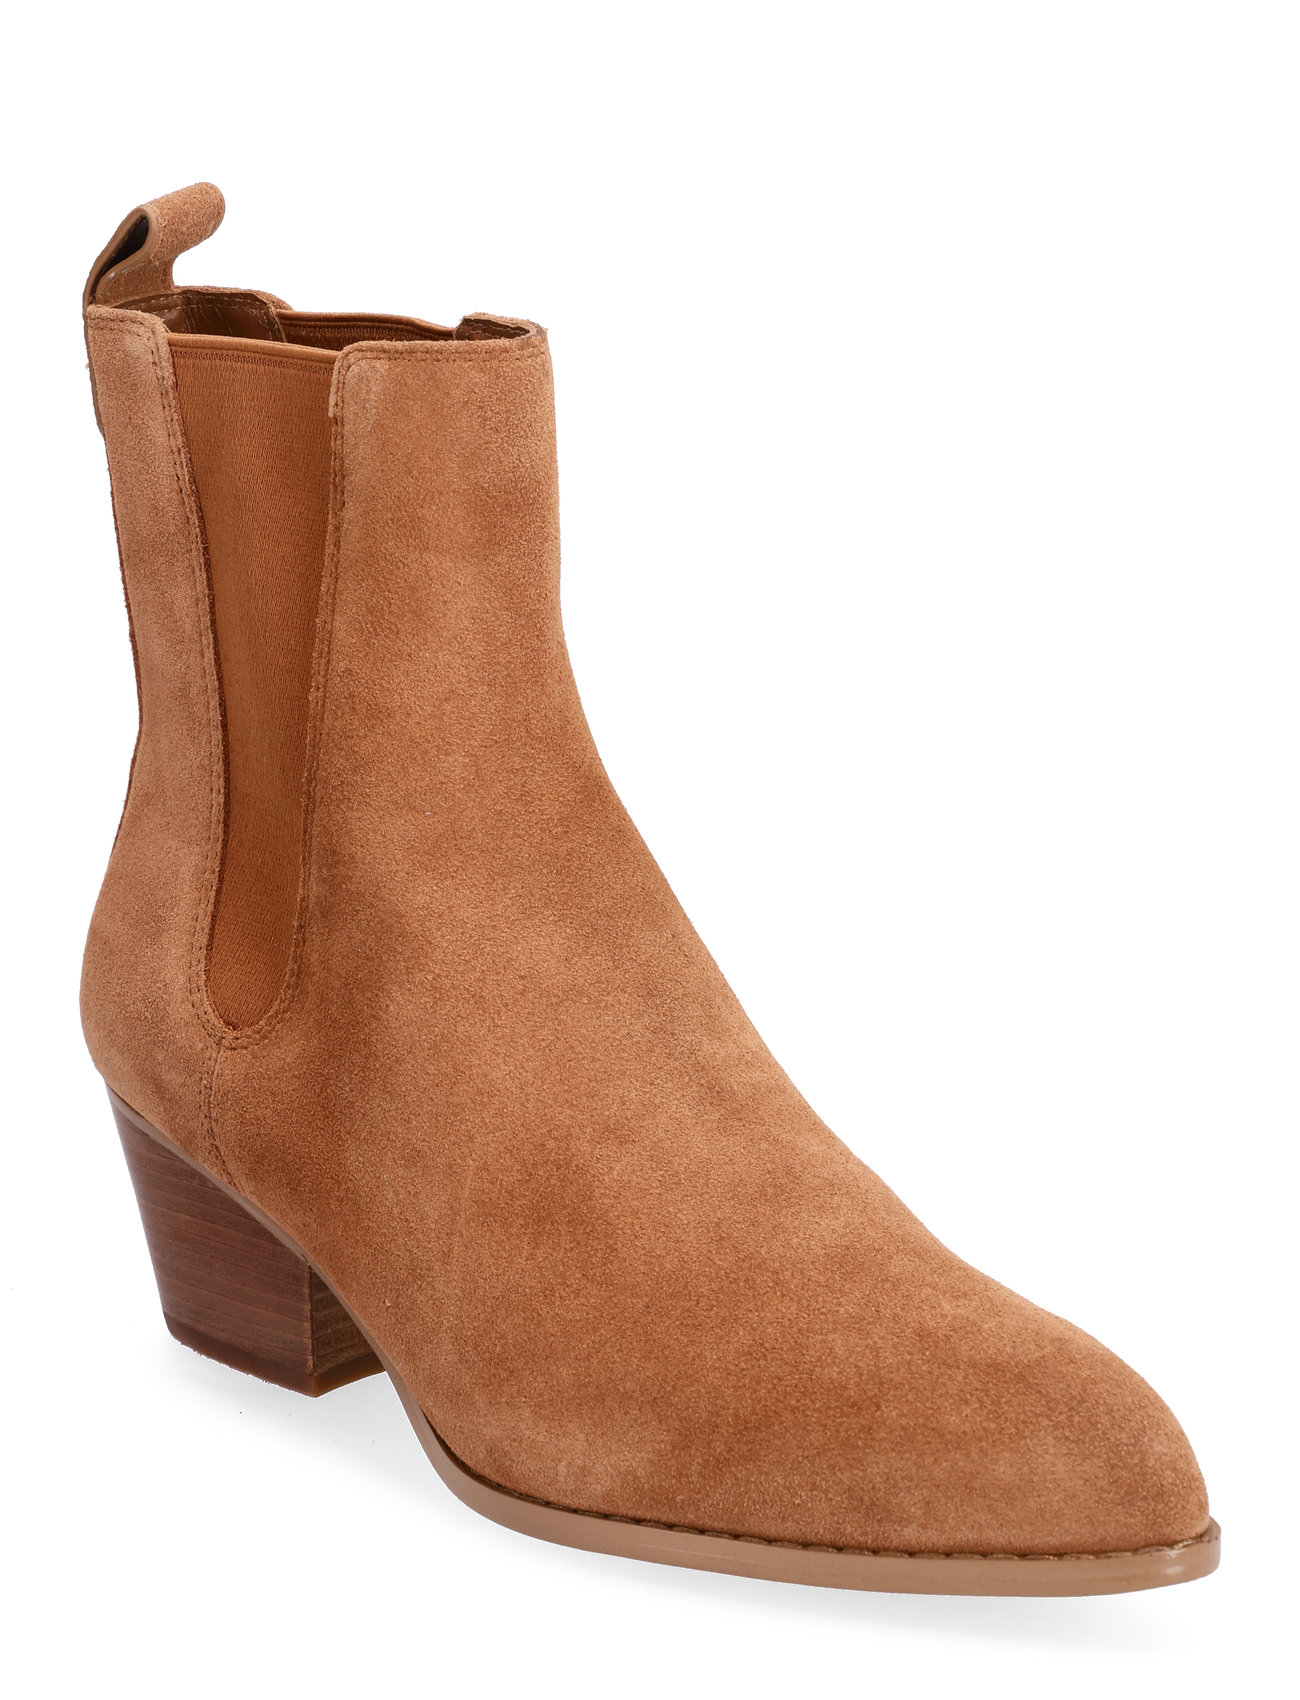 Kinlee Bootie Shoes Boots Ankle Boots Ankle Boots With Heel Beige Michael Kors